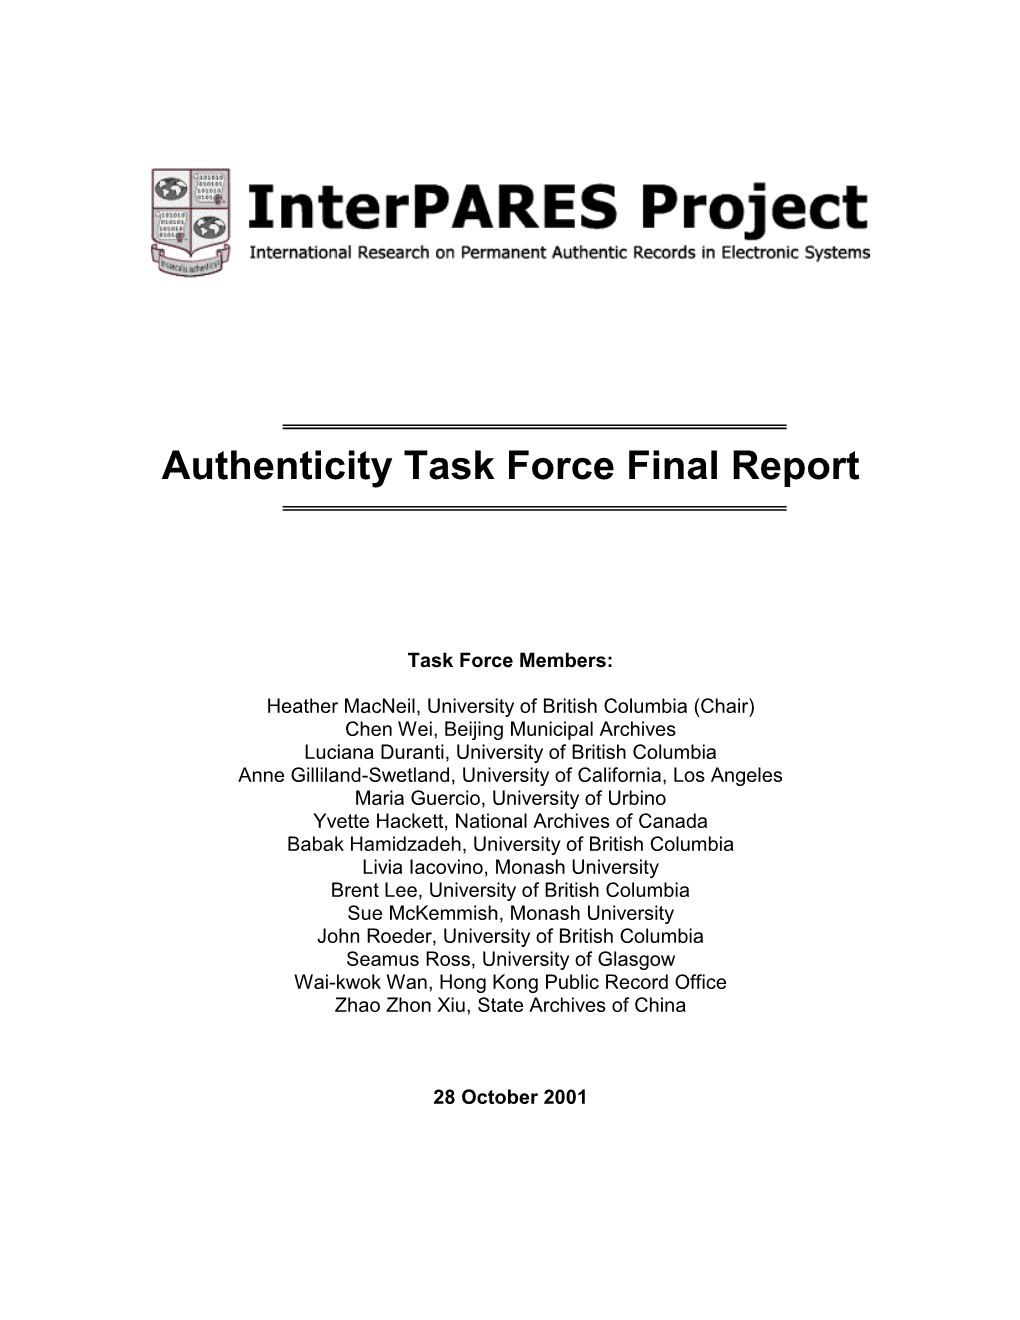 Authenticity Task Force Final Report